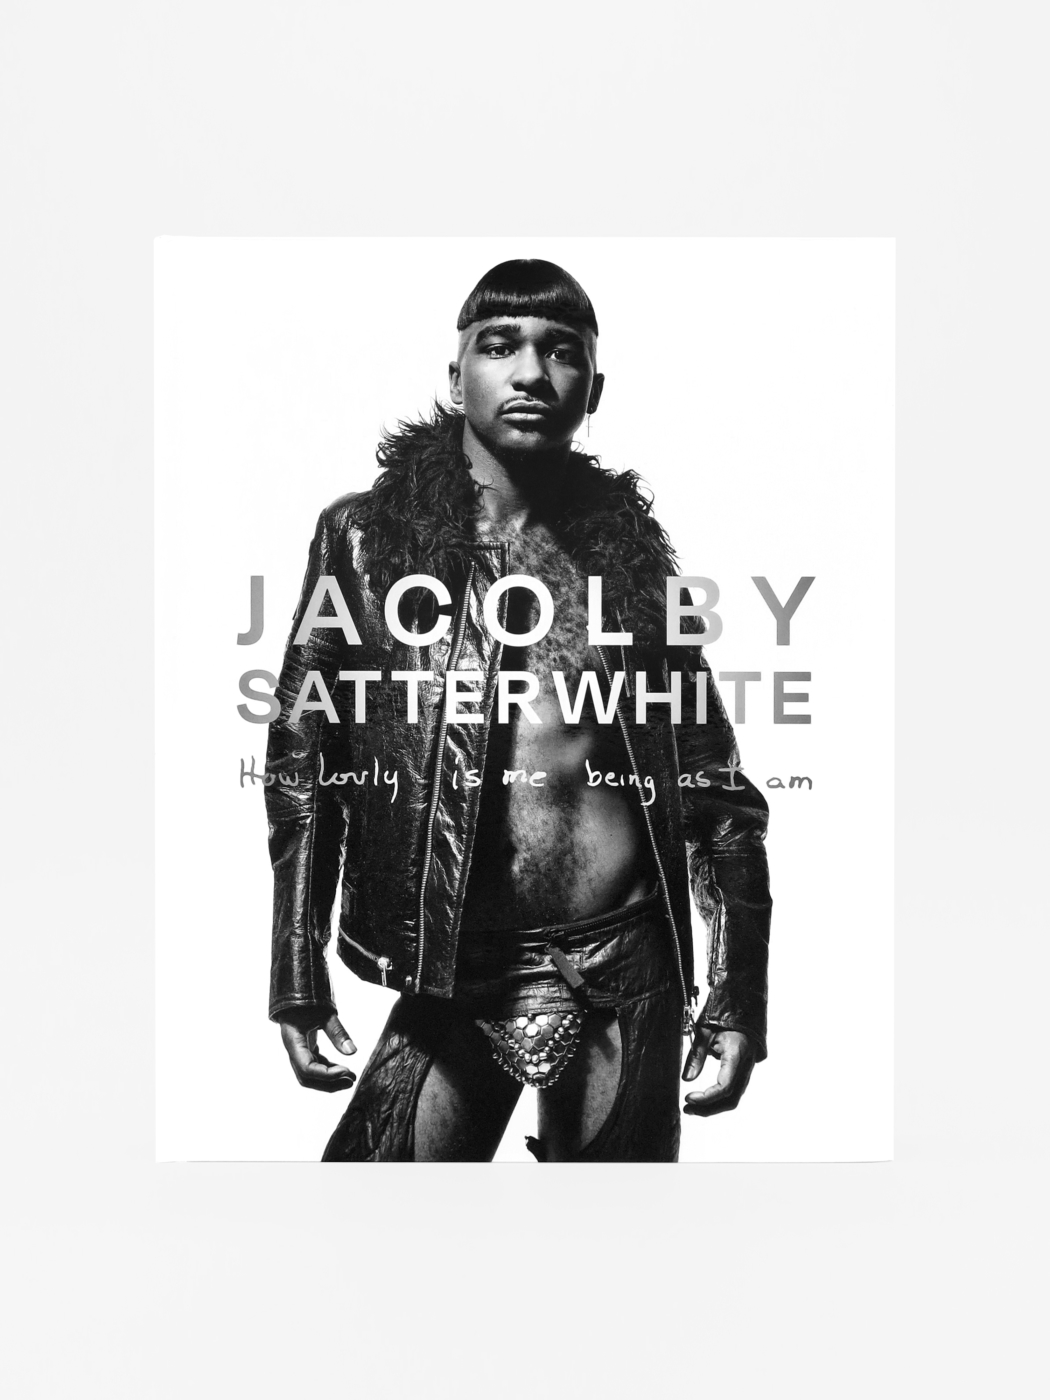 Jacolby Satterwhite, How lovly is me being as I am